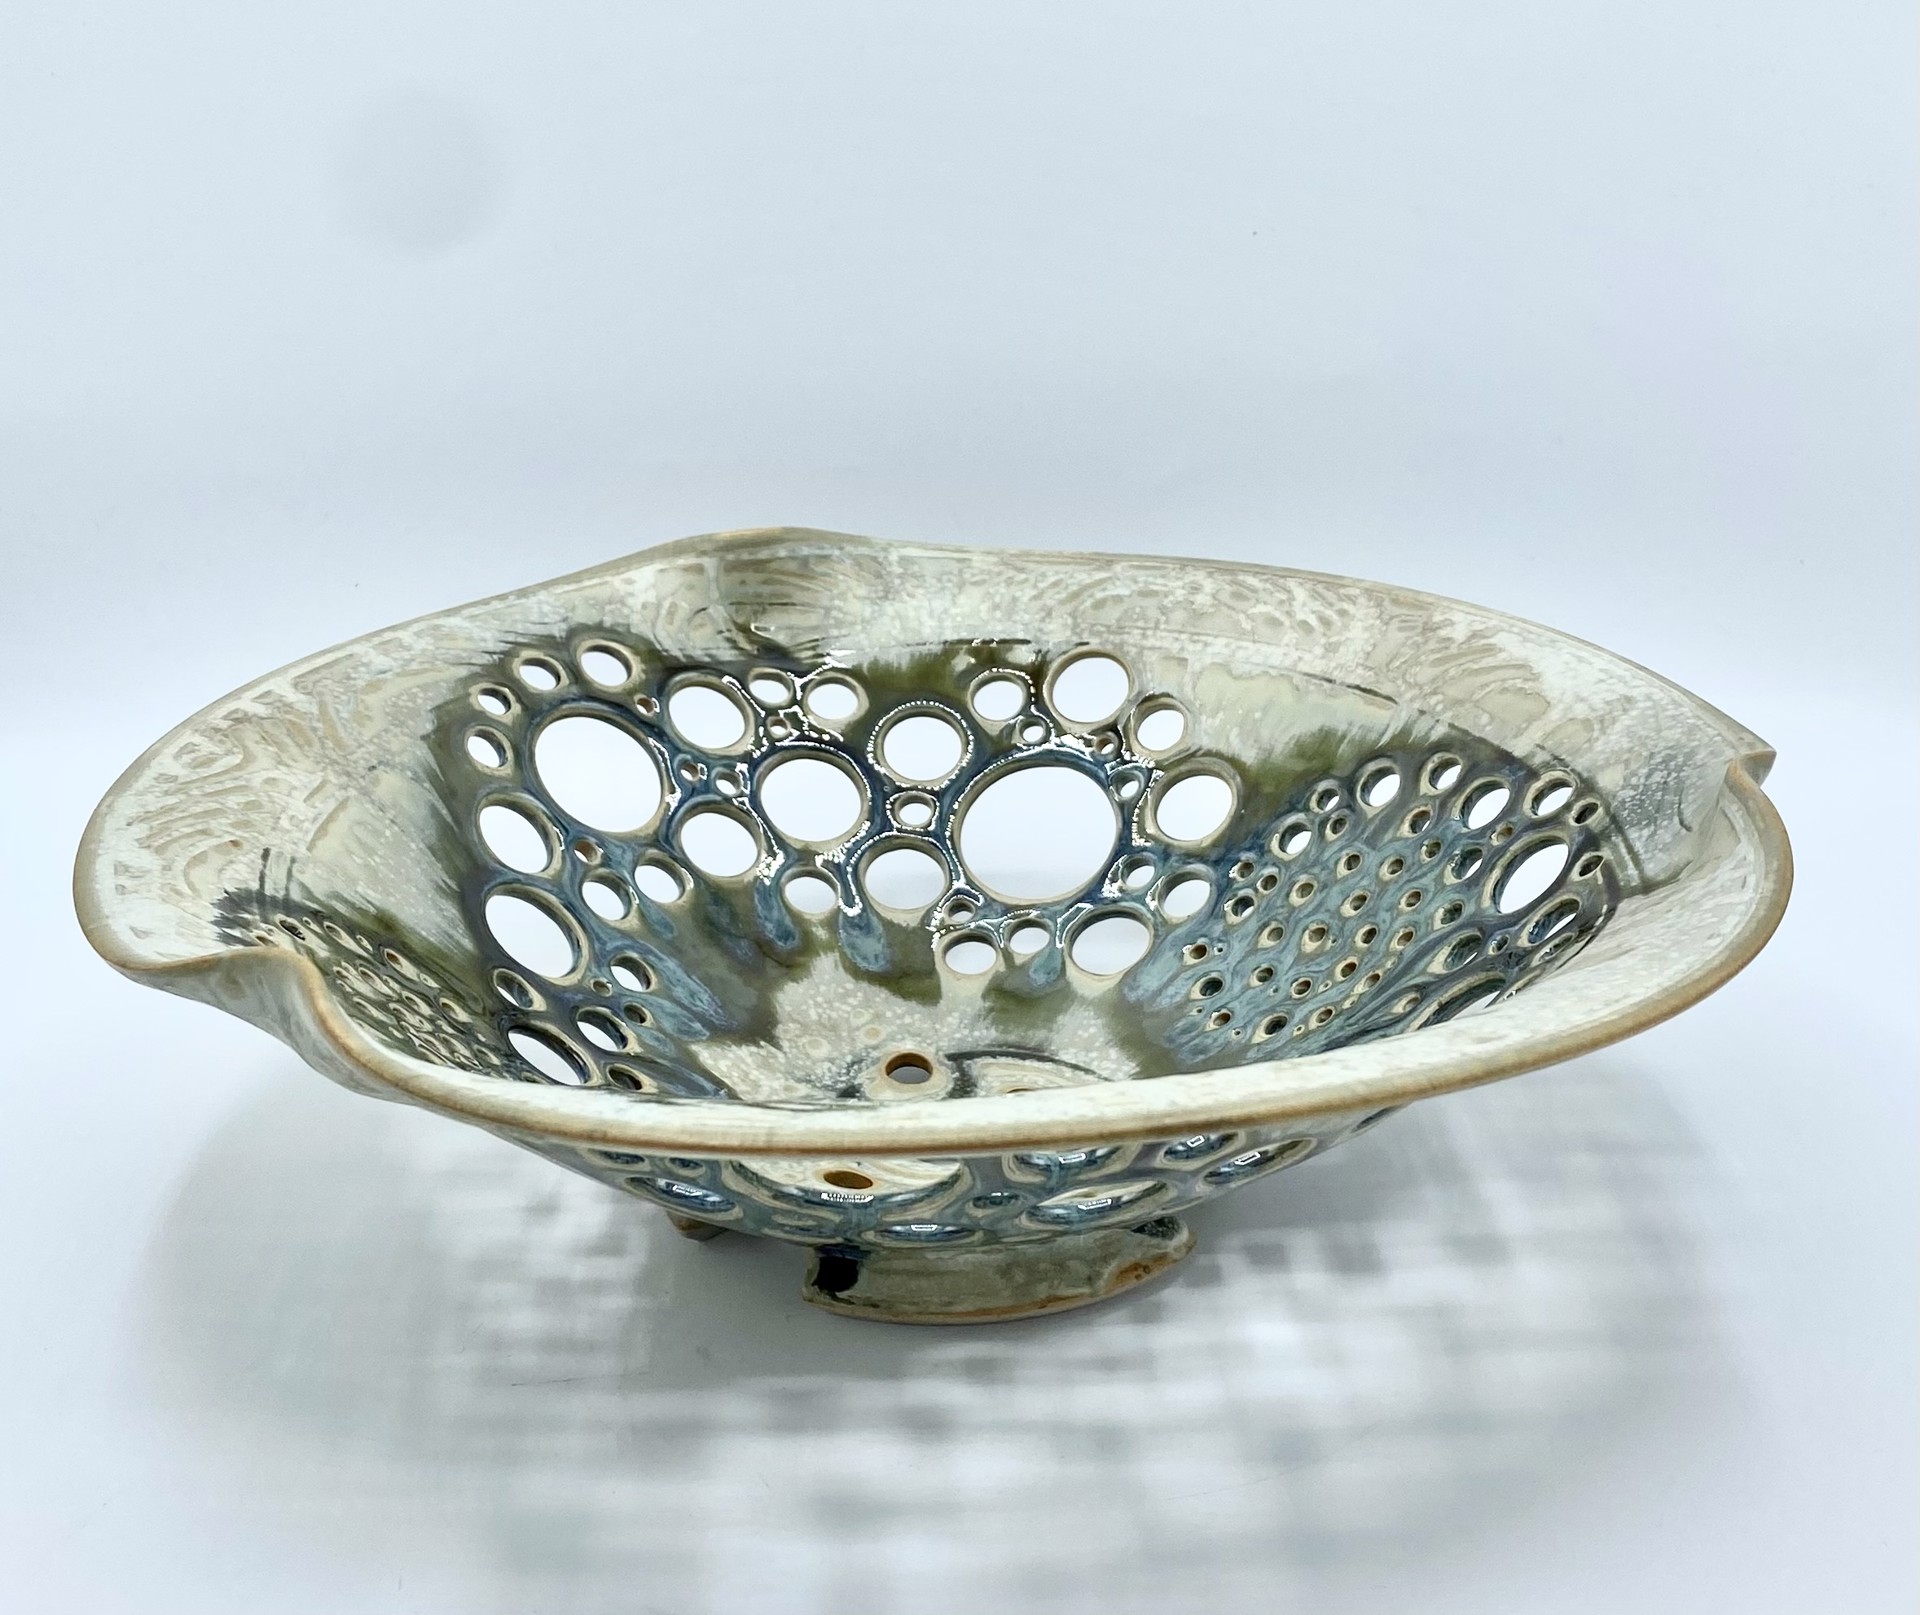 Medium Bowl with Holes by J. Wilson Pottery